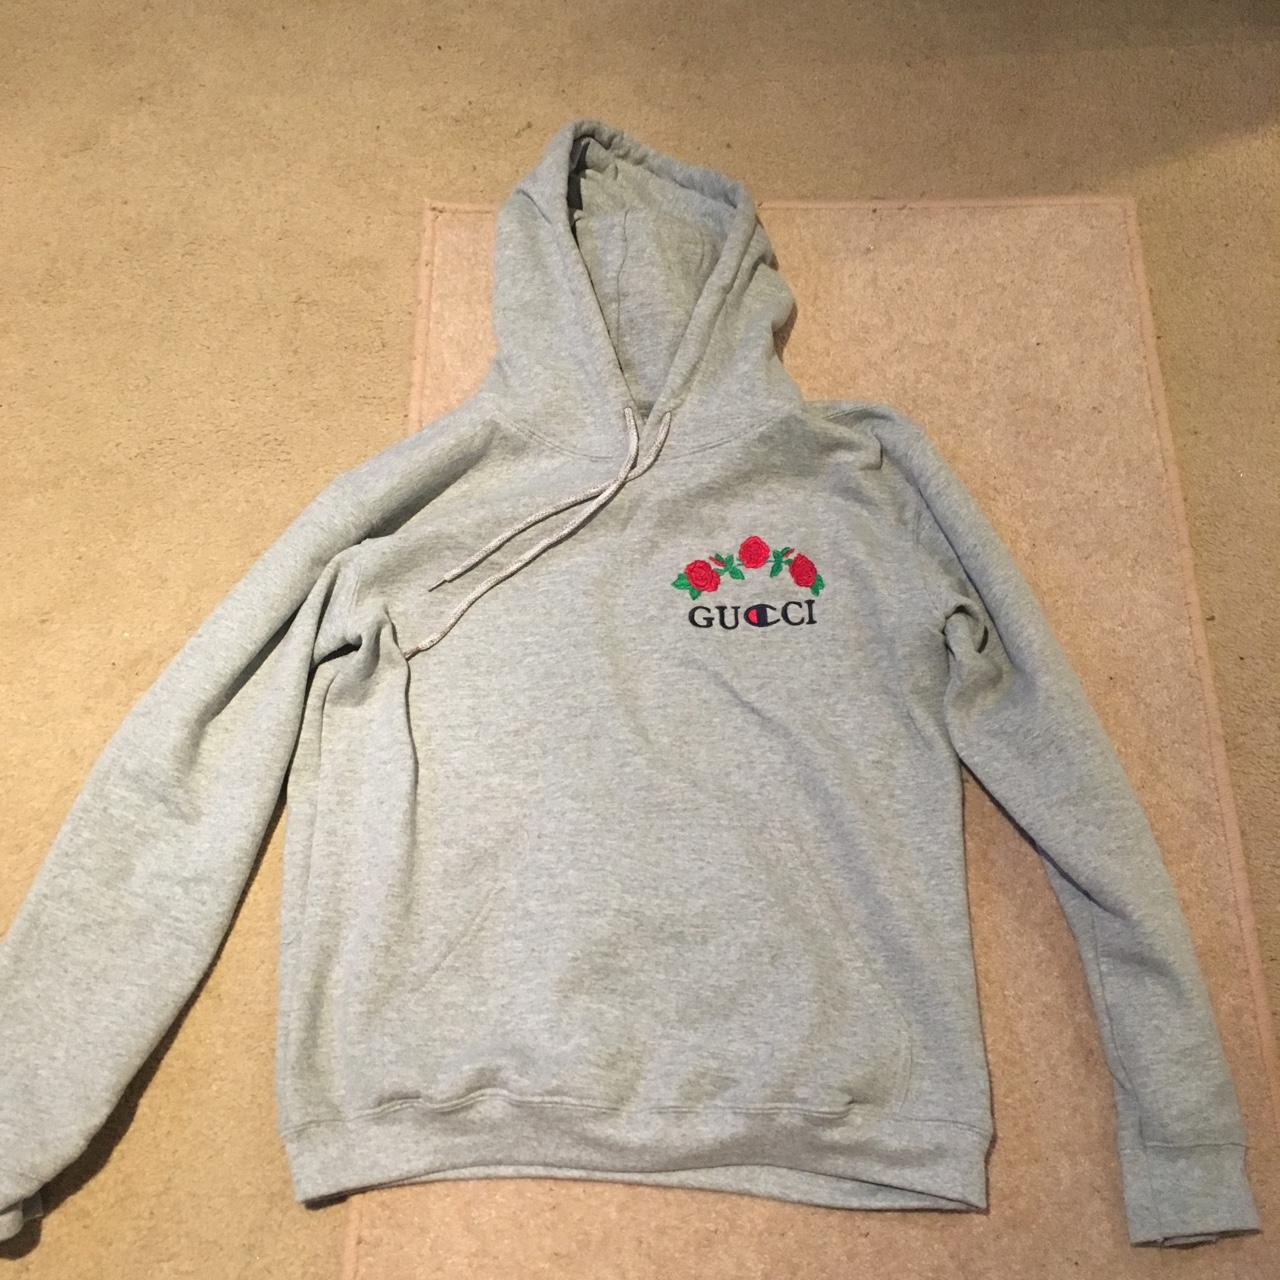 Champion Gucci hoodie by Ava - Depop